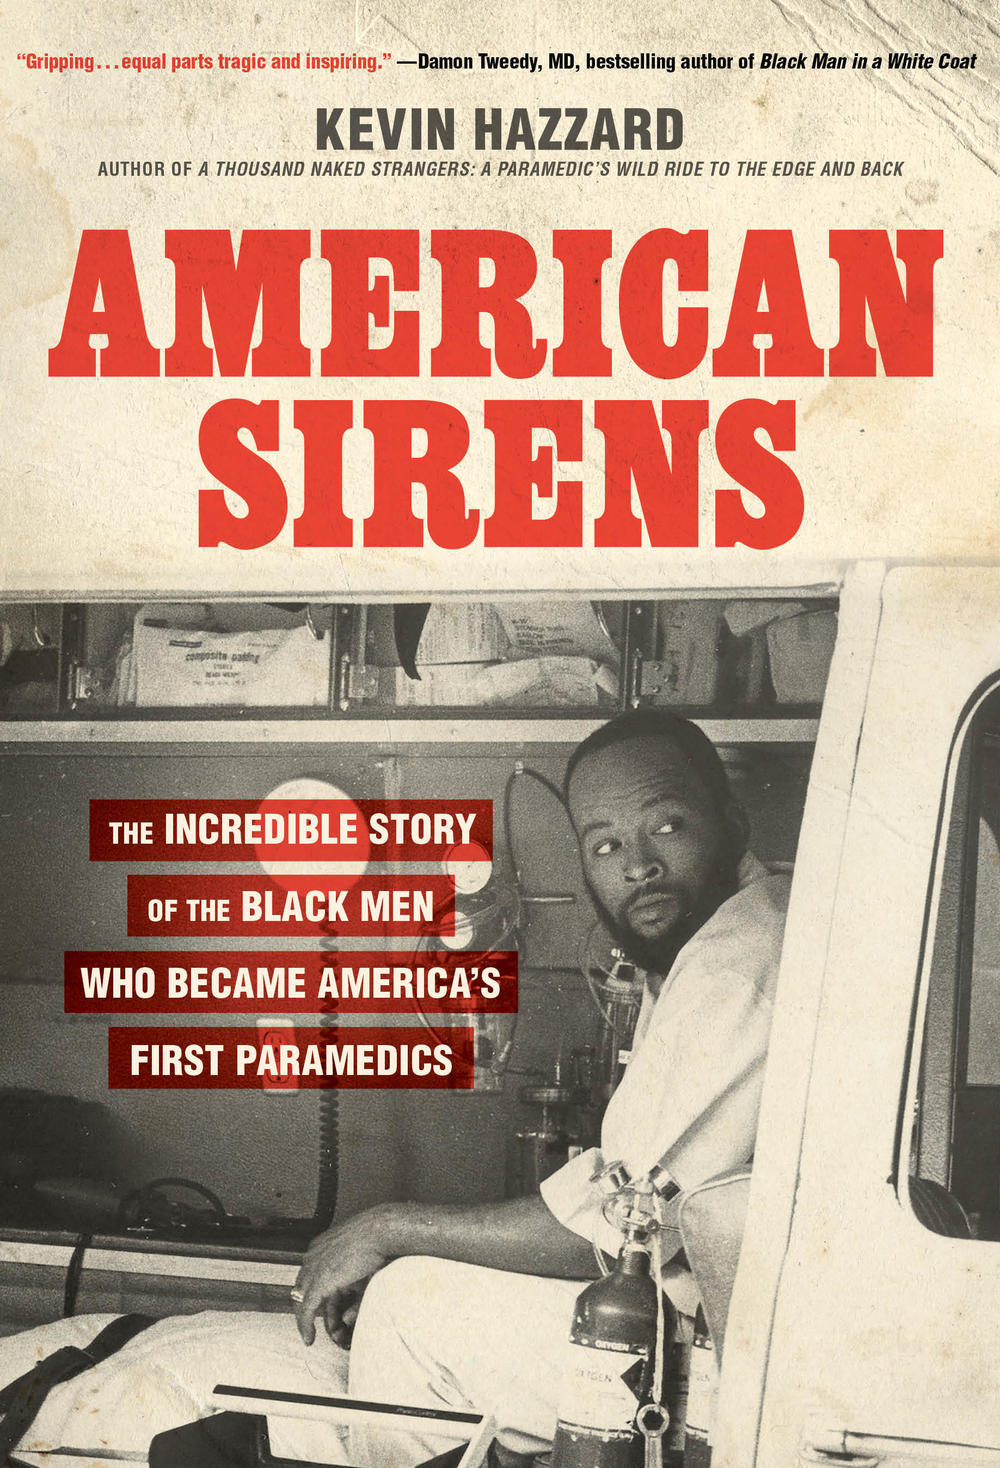 American Sirens, a book by Kevin Hazzard, traces the history of the professional ambulance service in the U.S.